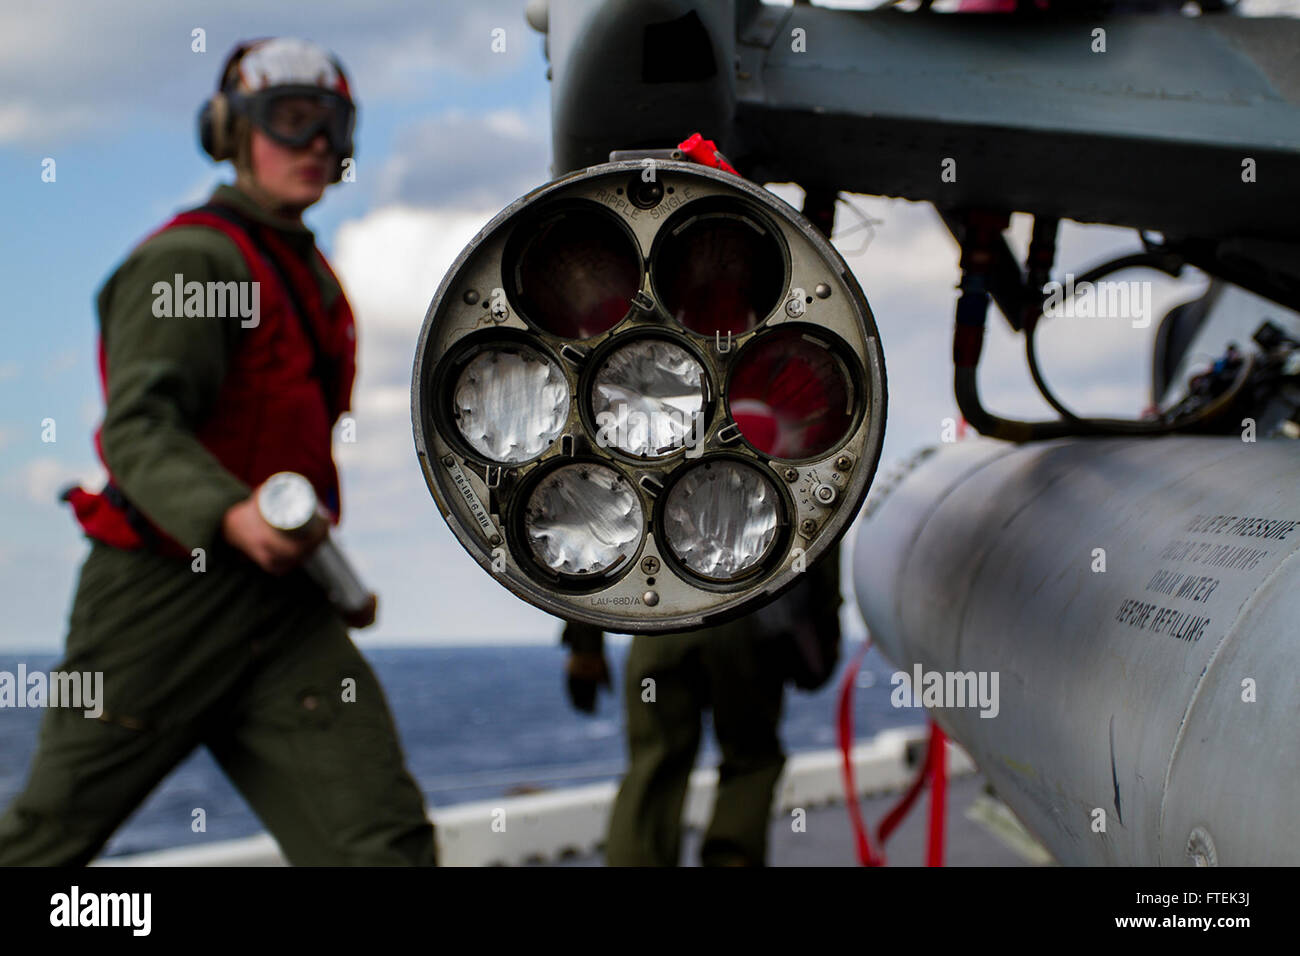 150107-M-WA276-050 MEDITERRANEAN SEA (Jan. 7, 2015) Corporal Stephen Cusson, an aviation ordnance technician assigned to the Marine Medium Tiltrotor Squadron 365 (Reinforced), 24th Marine Expeditionary Unit, loads a 2.75-inch rocket in to a LAU-68 rocket pod attached to an AH-1W Cobra attack helicopter aboard USS Iwo Jima (LPD 7) Jan. 7, 2015. The 24th MEU and Iwo Jima Amphibious Ready Group are conducting naval operations in the U.S. 6th Fleet area of operations in support of U.S. national security interests in Europe. (U.S. Marine Corps photo by Lance Corporal Dani A. Zunun/Released) Stock Photo